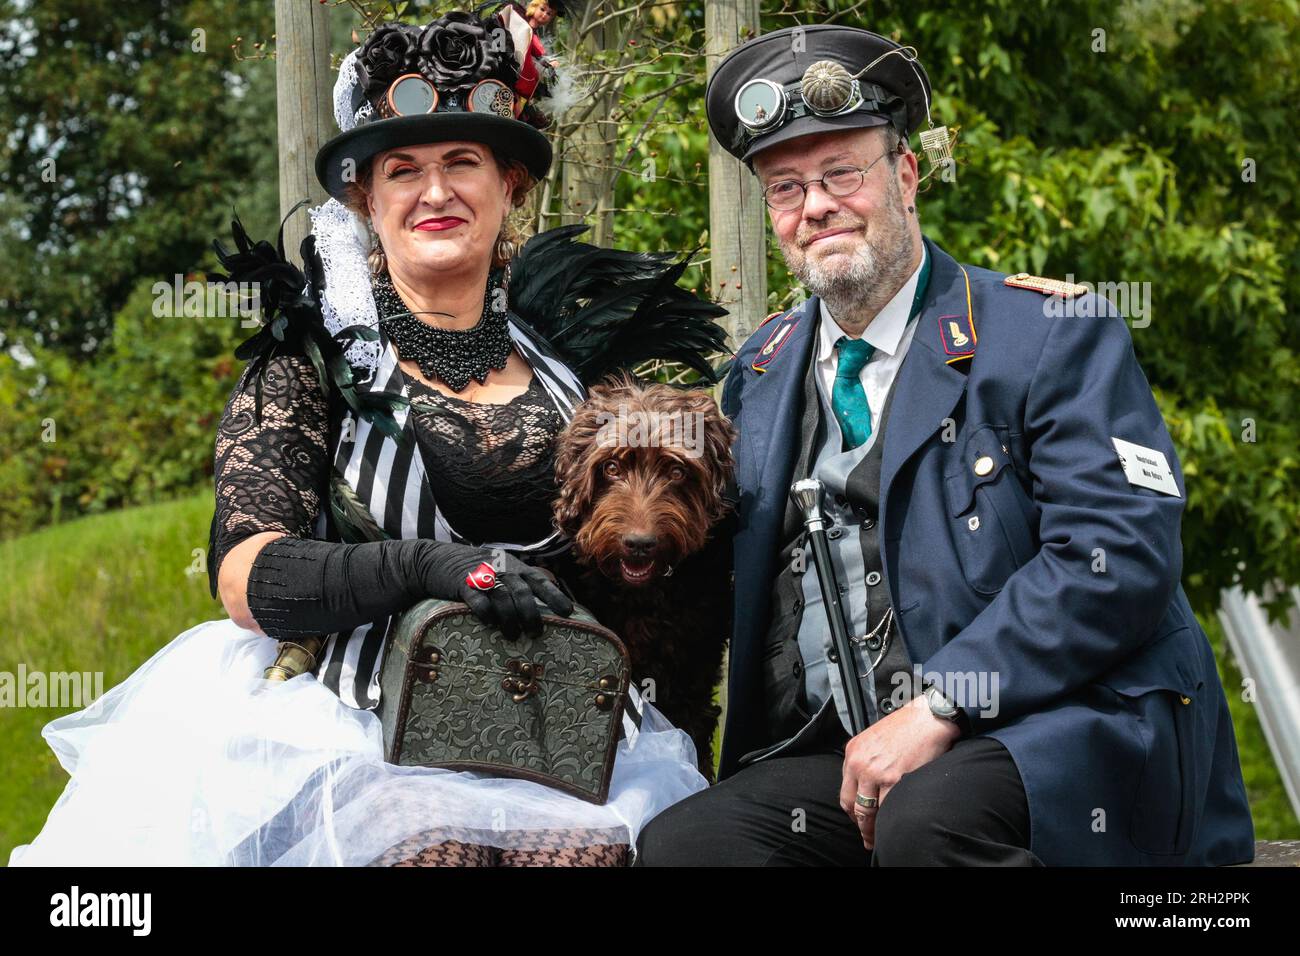 Henrichenburg, Waltrop, Germany. 13th Aug, 2023. Steampunk fans, groups and visitors, many in retro-futuristic or Victorian inspired outfits, have fun on the second day of the Steampunk Jubilee Festival weekend at the historic Henrichenburg boat lift, a listed industrial heritage site landmark. Credit: Imageplotter/Alamy Live News Stock Photo